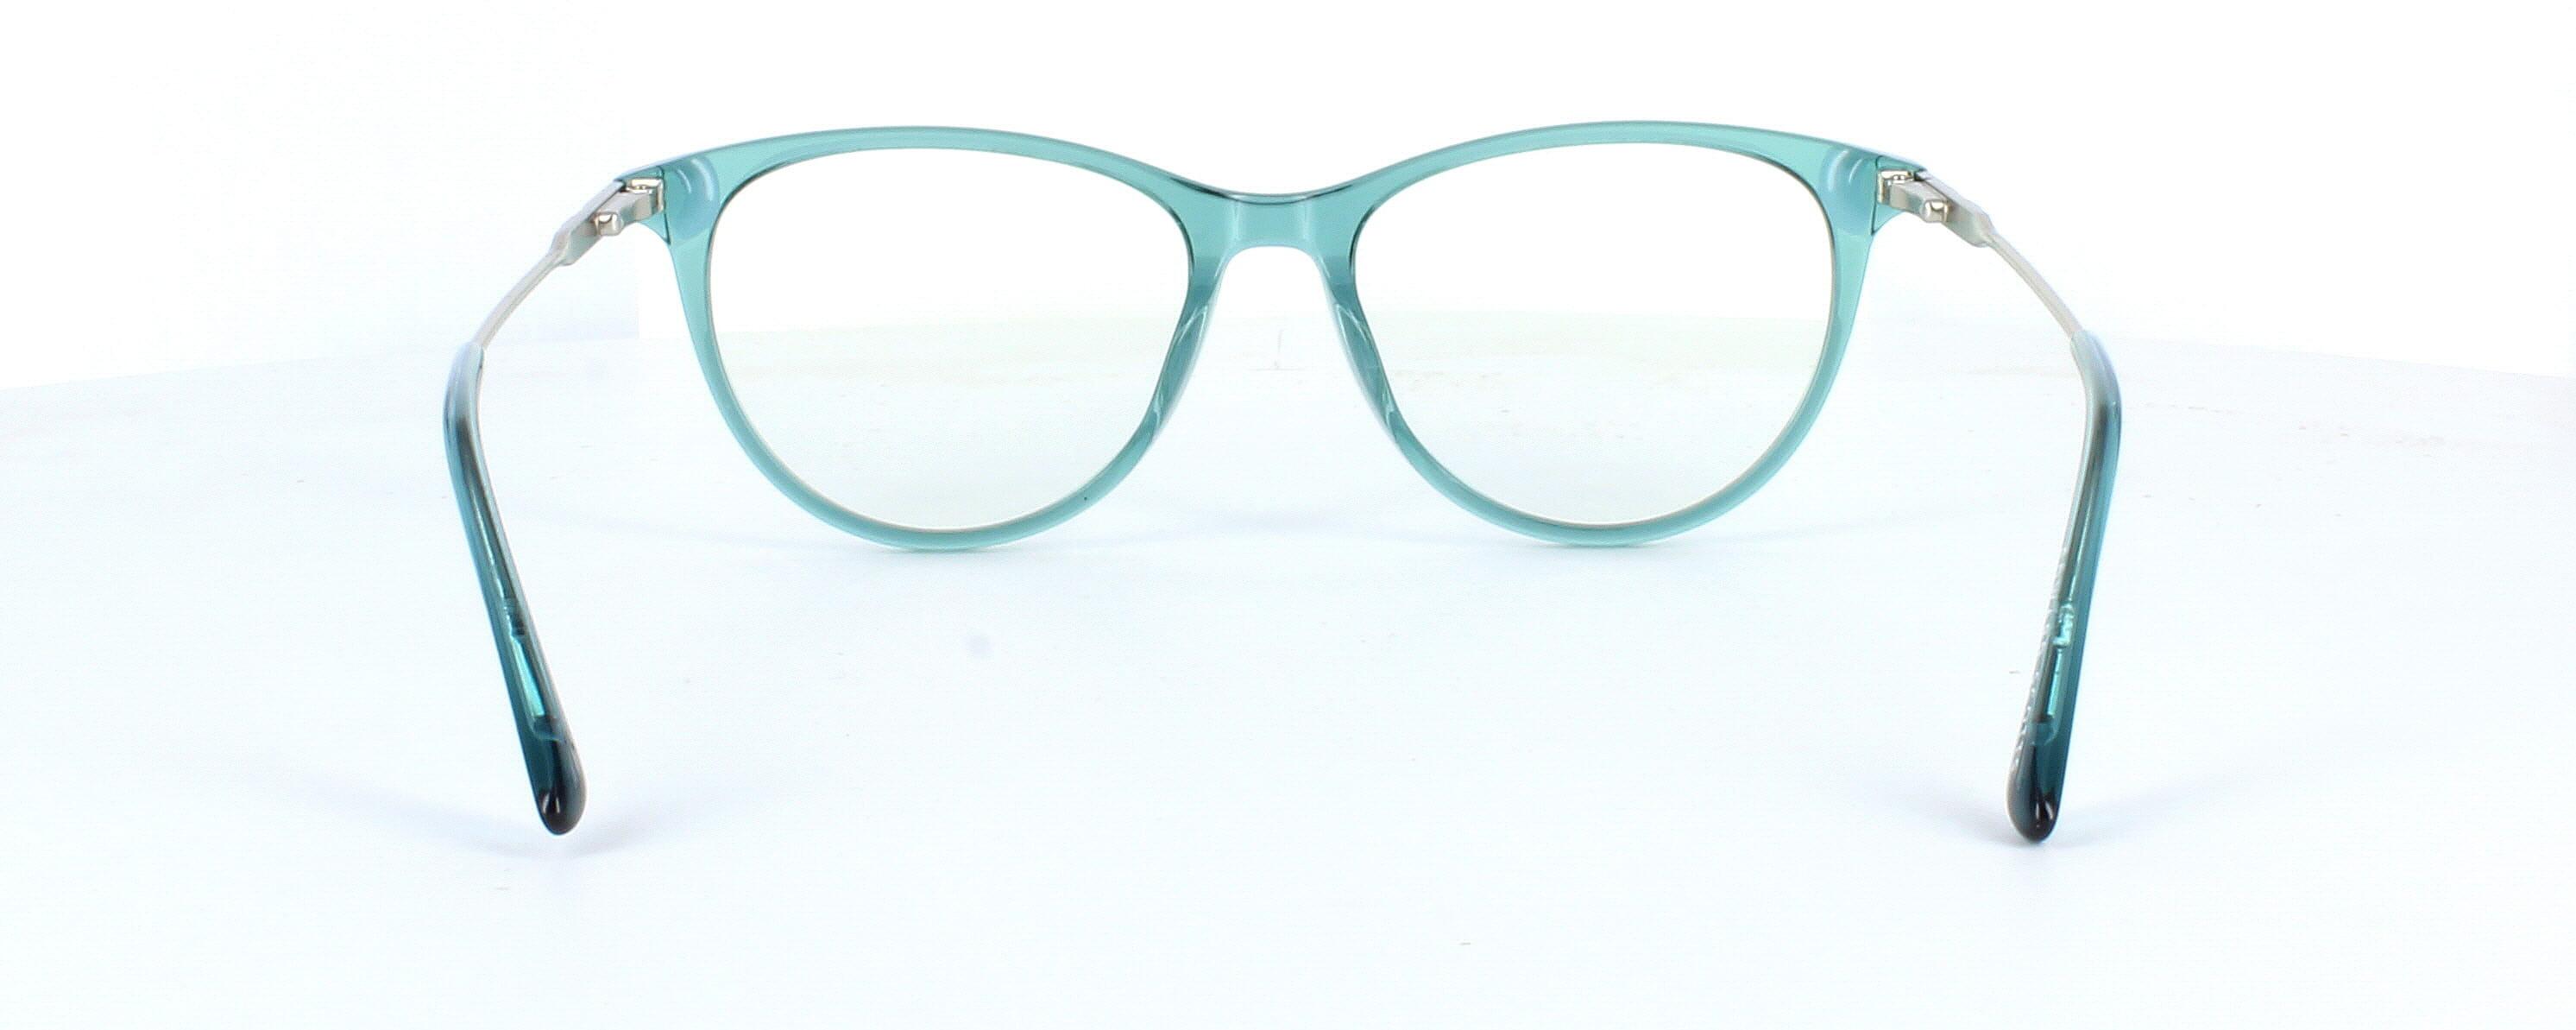 Edward Scotts BJ9201 C43 - Women's oval shaped shiny turquoise acetate glasses with gold metal spring hinged arms - image view 4